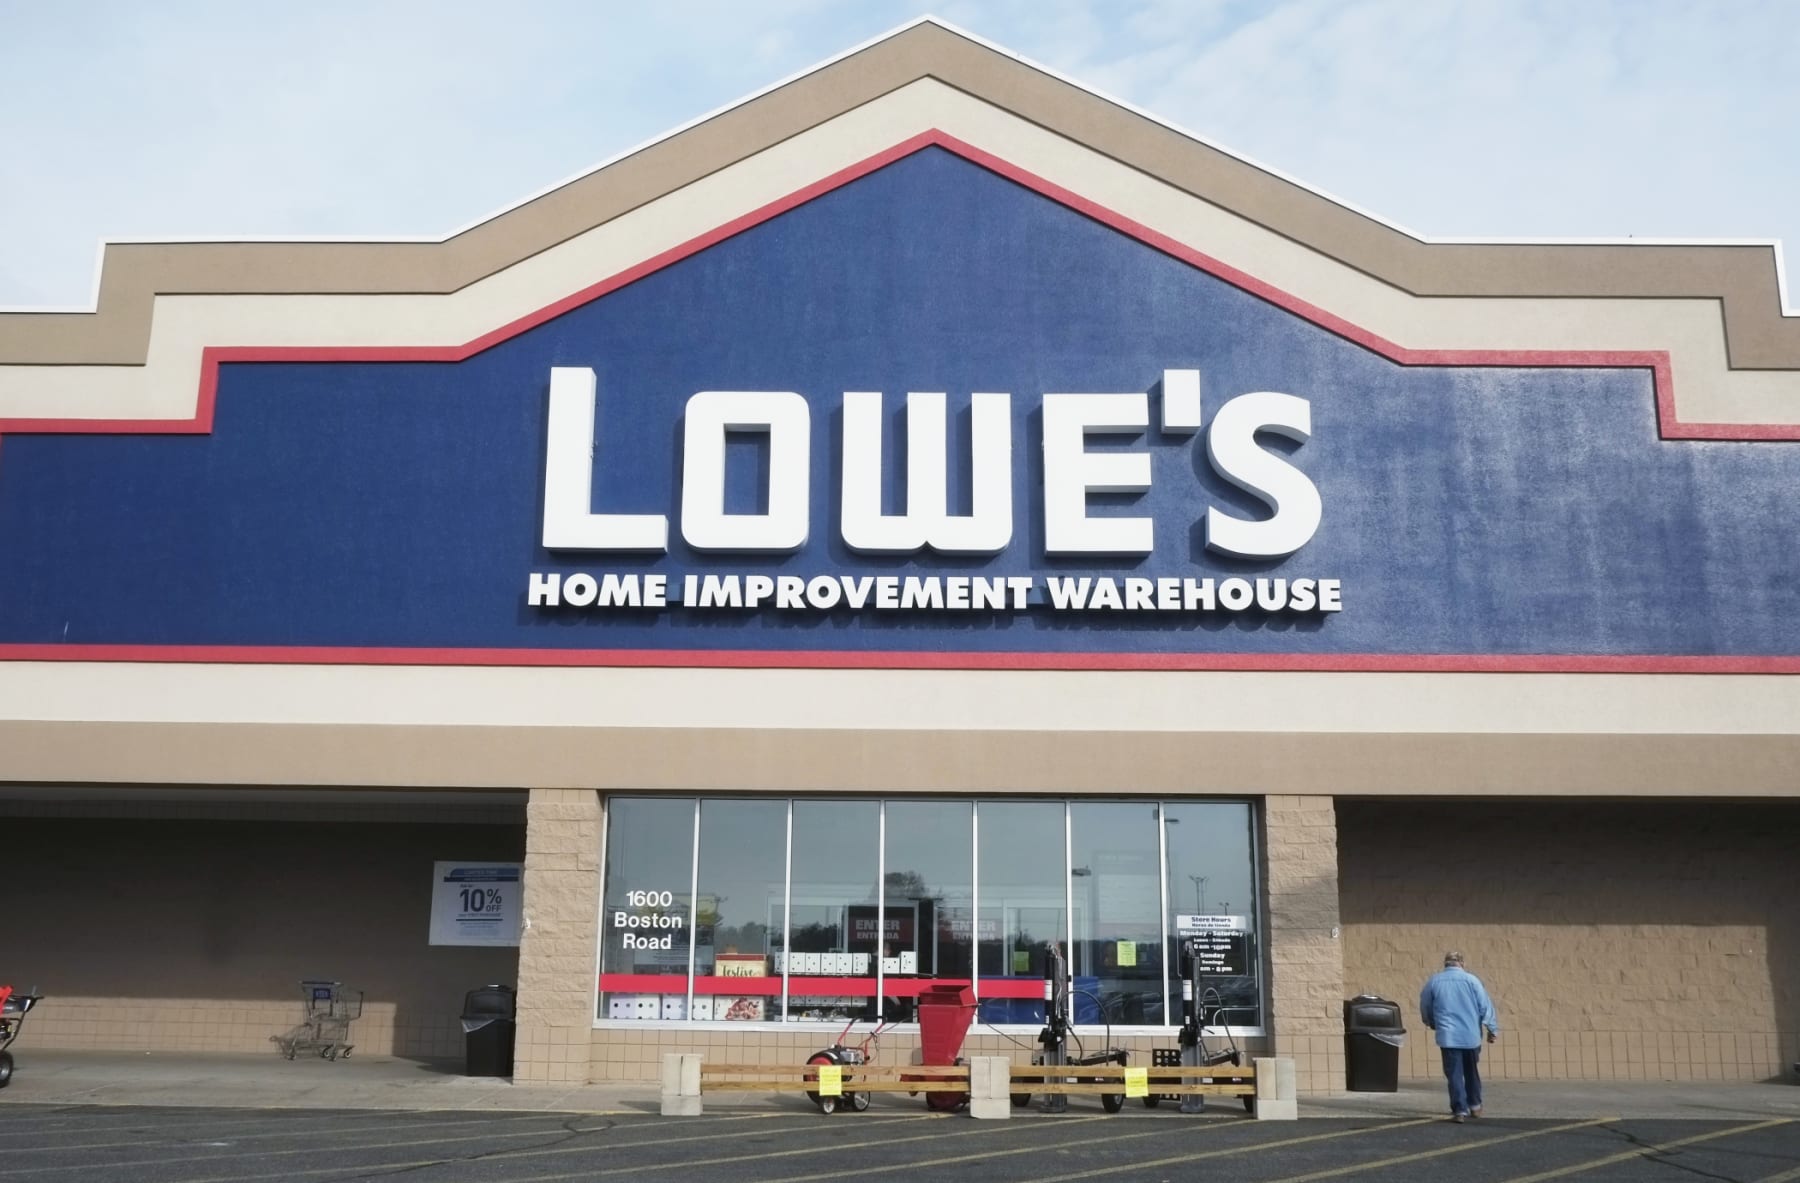 When Can You Find The Best Holiday Decor Clearance Sales At Lowe's?